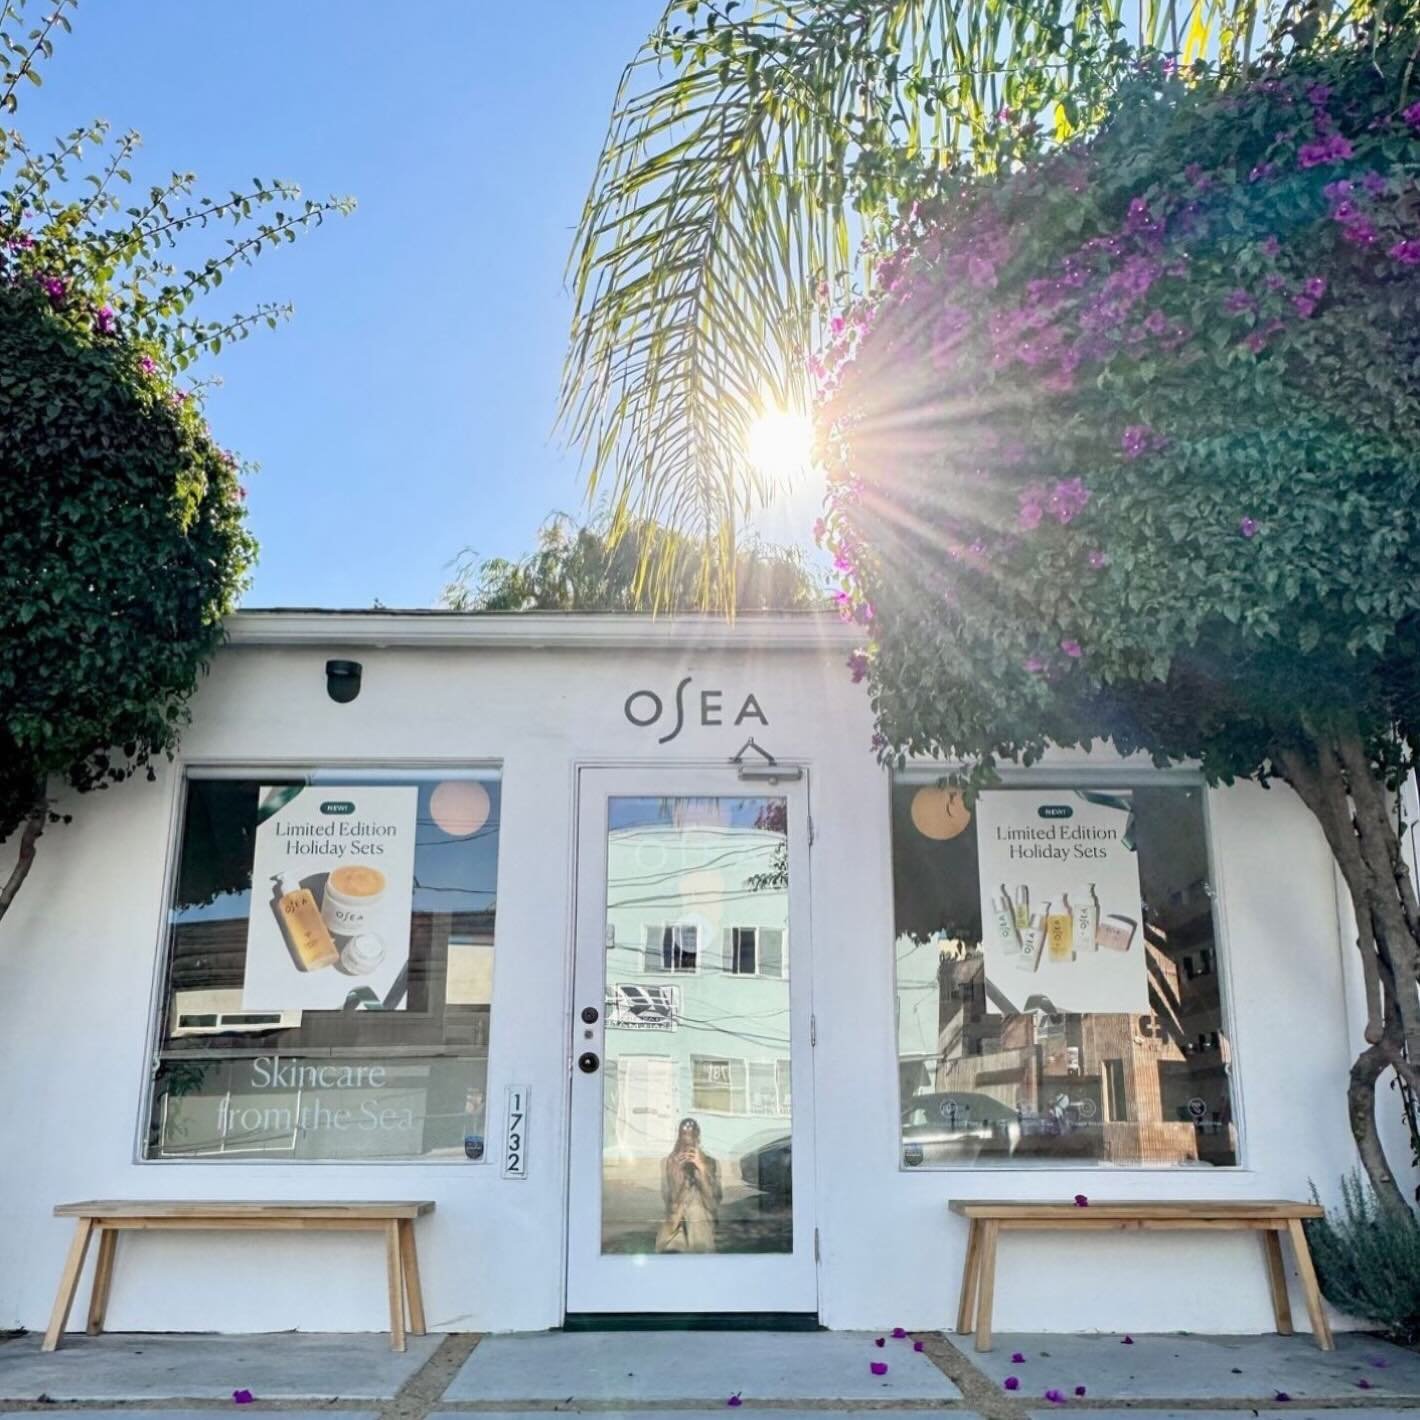 Osea ~ 1732 Abbot Kinney Blvd
Retail + treatment hours: Tues-Sun 10am-6pm
Seaweed infused skincare that respects the natural world and makes your skin look and feel its best. This spot is a beautiful retail and skincare studio space all rolled into o